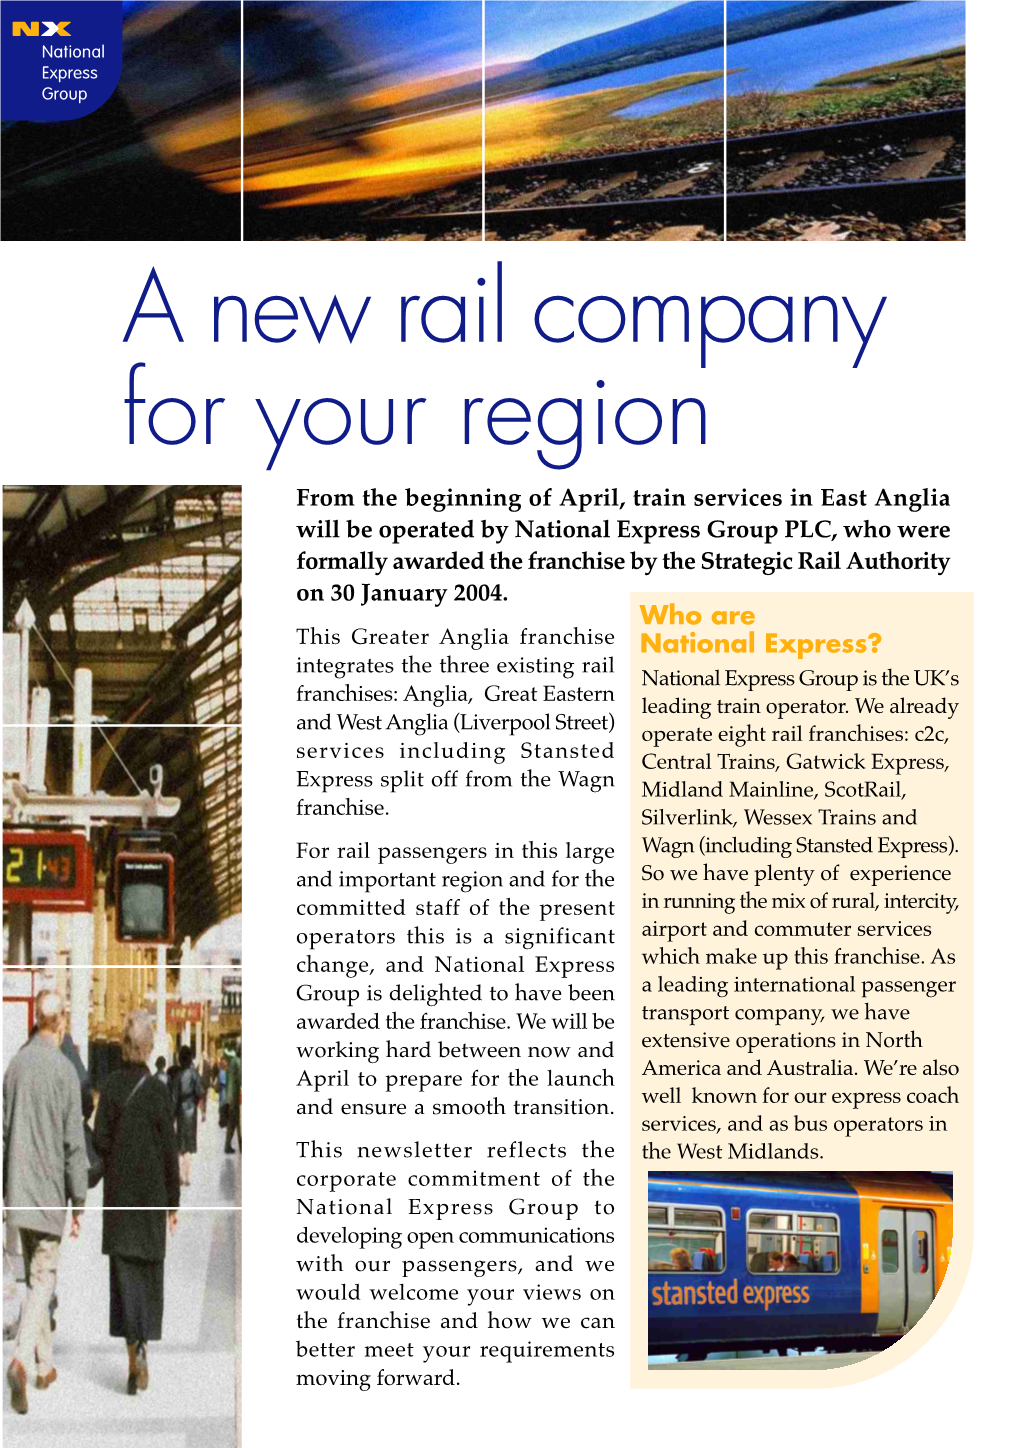 A New Rail Company for Your Region